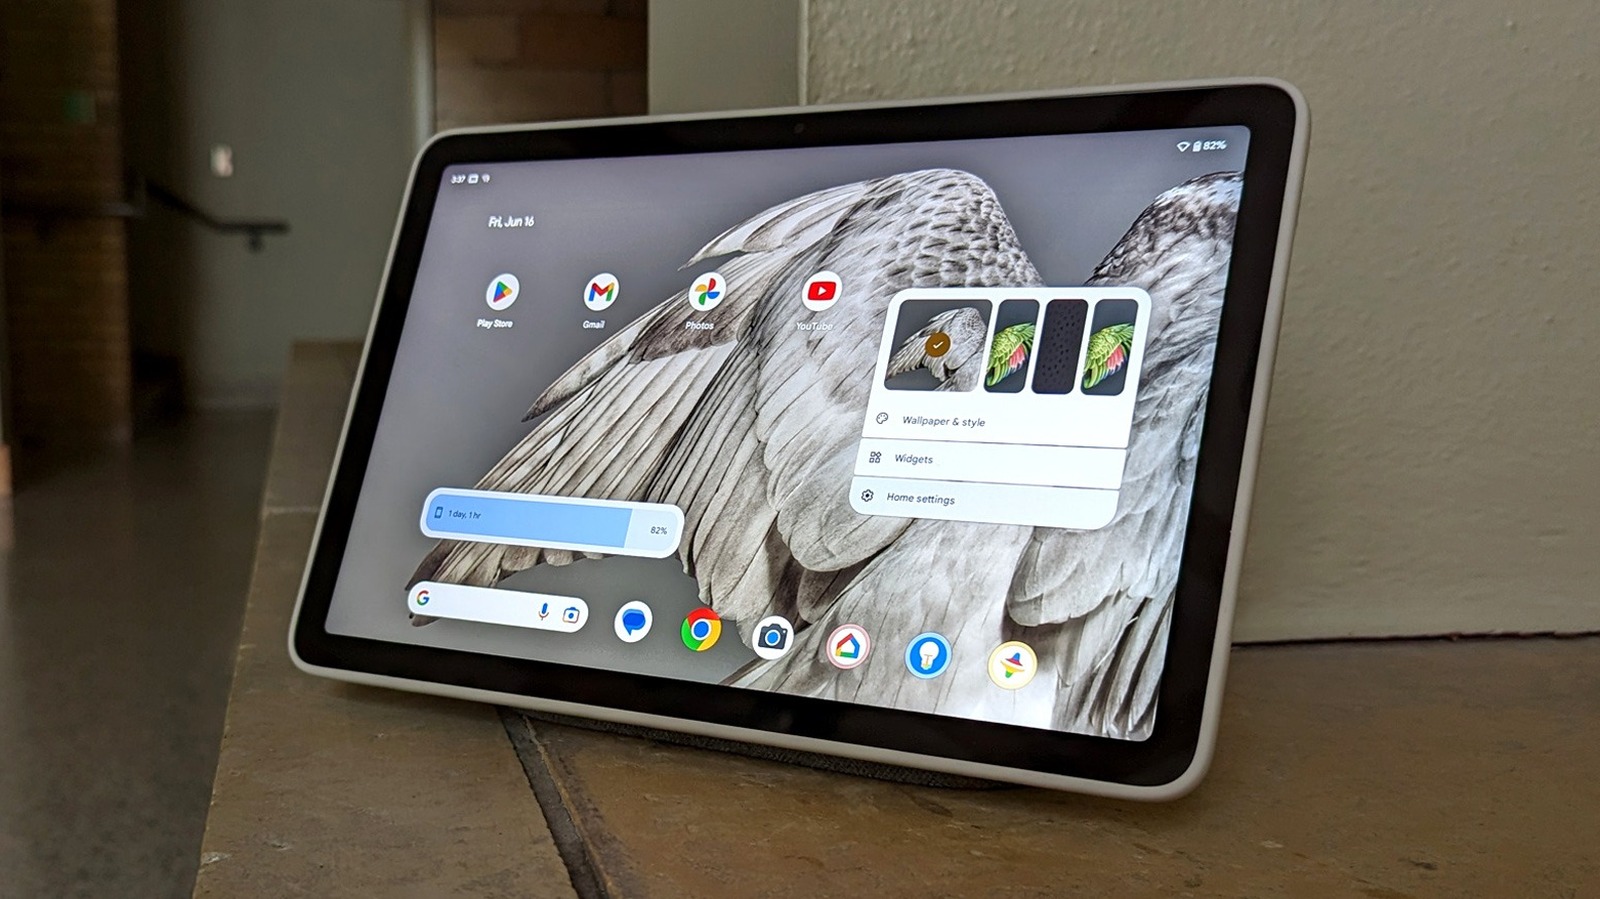 https://www.slashgear.com/img/gallery/google-pixel-tablet-review-not-made-to-battle-galaxy-tab-or-ipad-and-thats-a-good-thing/l-intro-1687243152.jpg